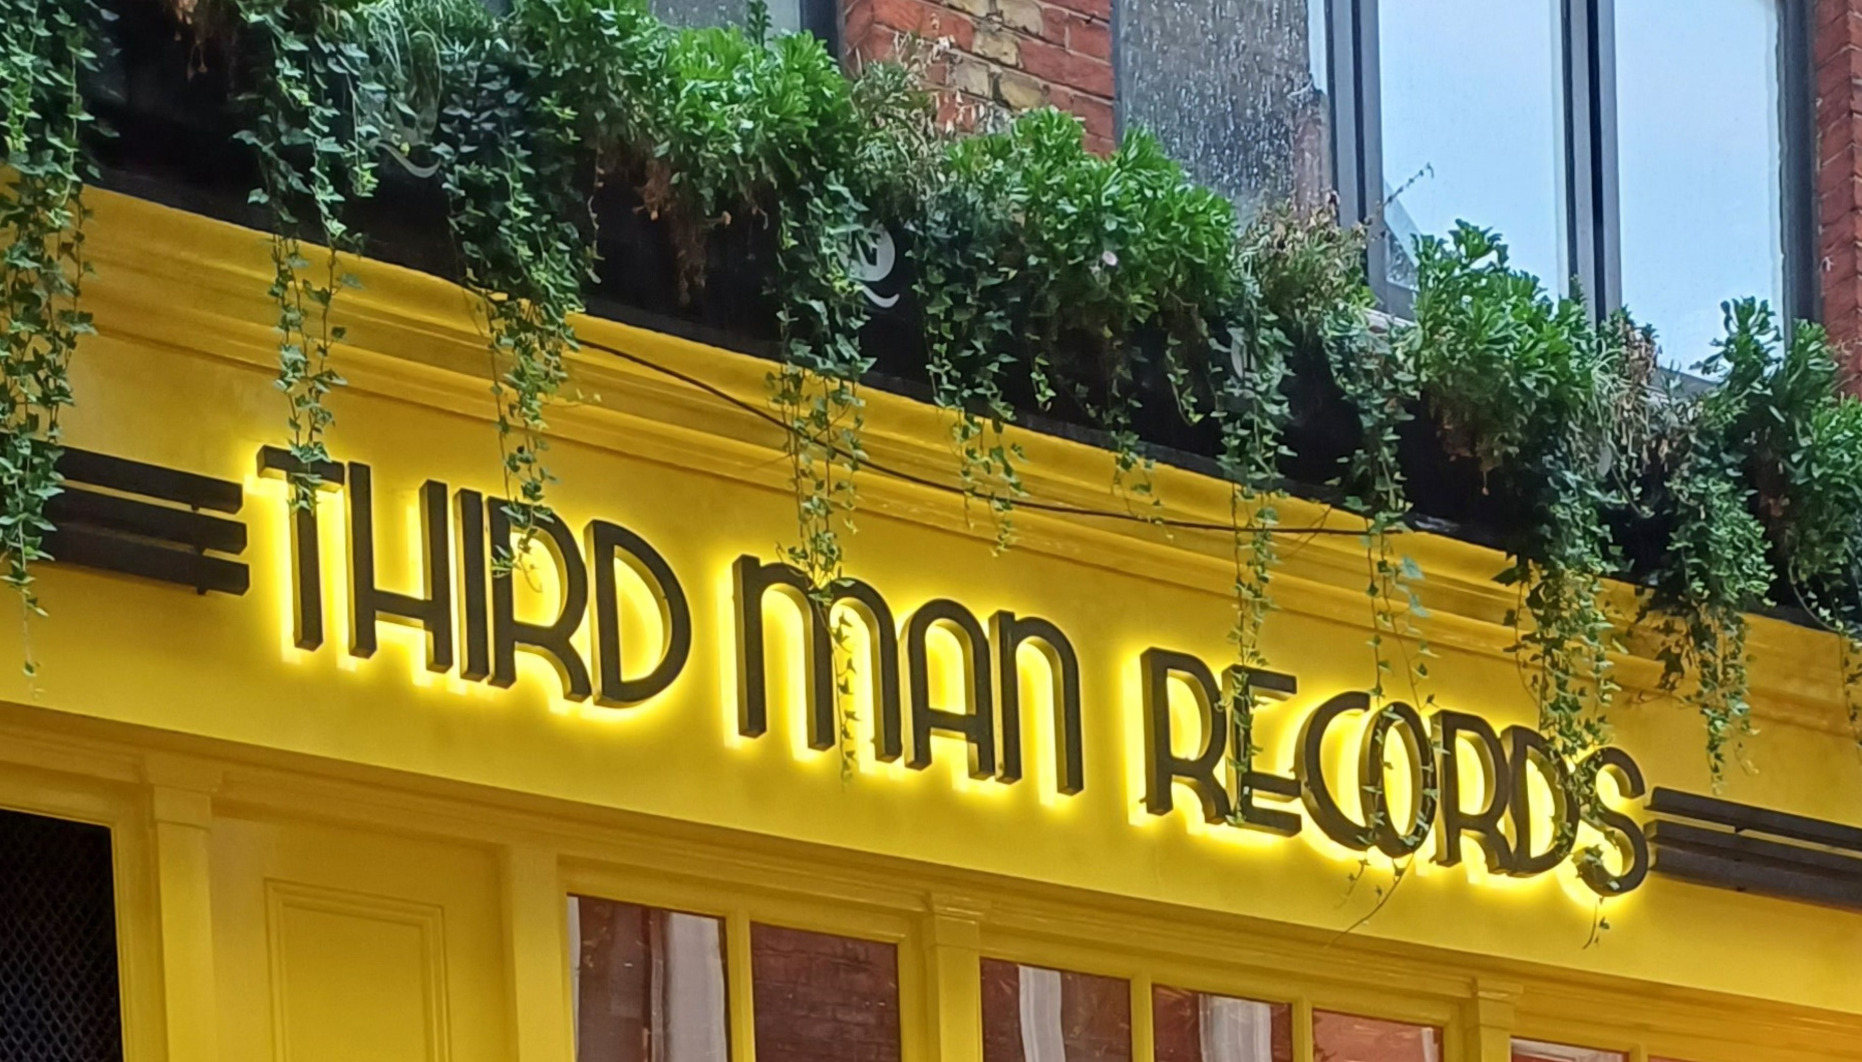 The signage on the front of Third Man Records in London, reading Third Man Records